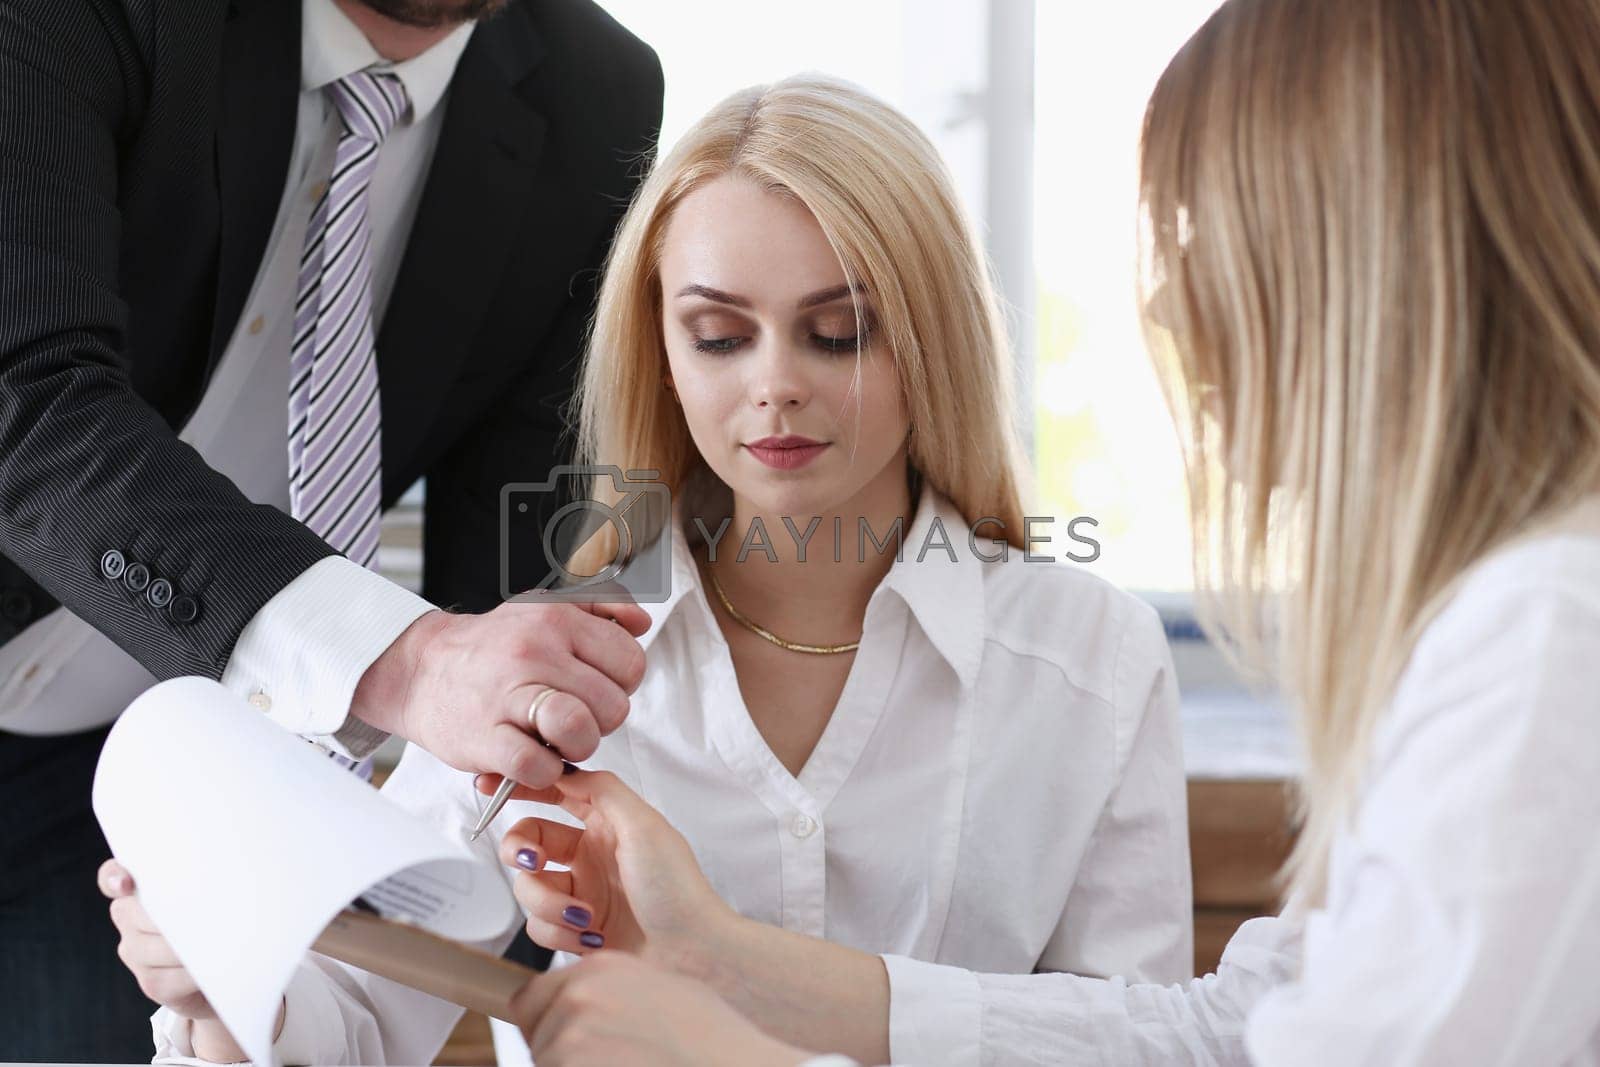 Royalty free image of Beautiful woman portrait at workplace examining by kuprevich